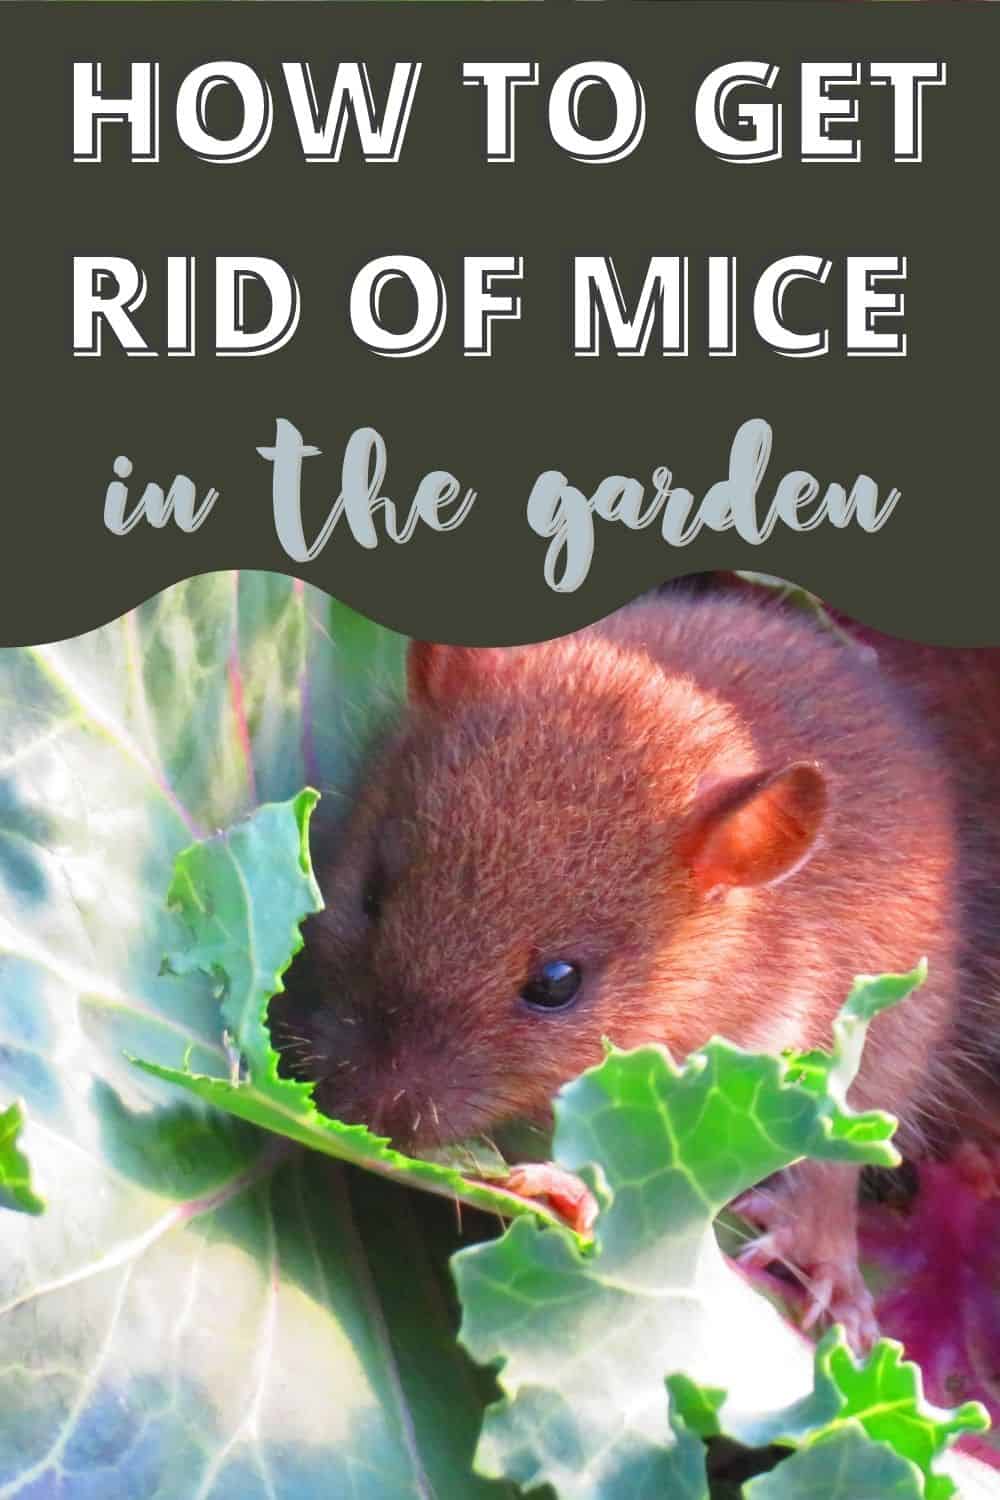 How to get rid of mice in the garden